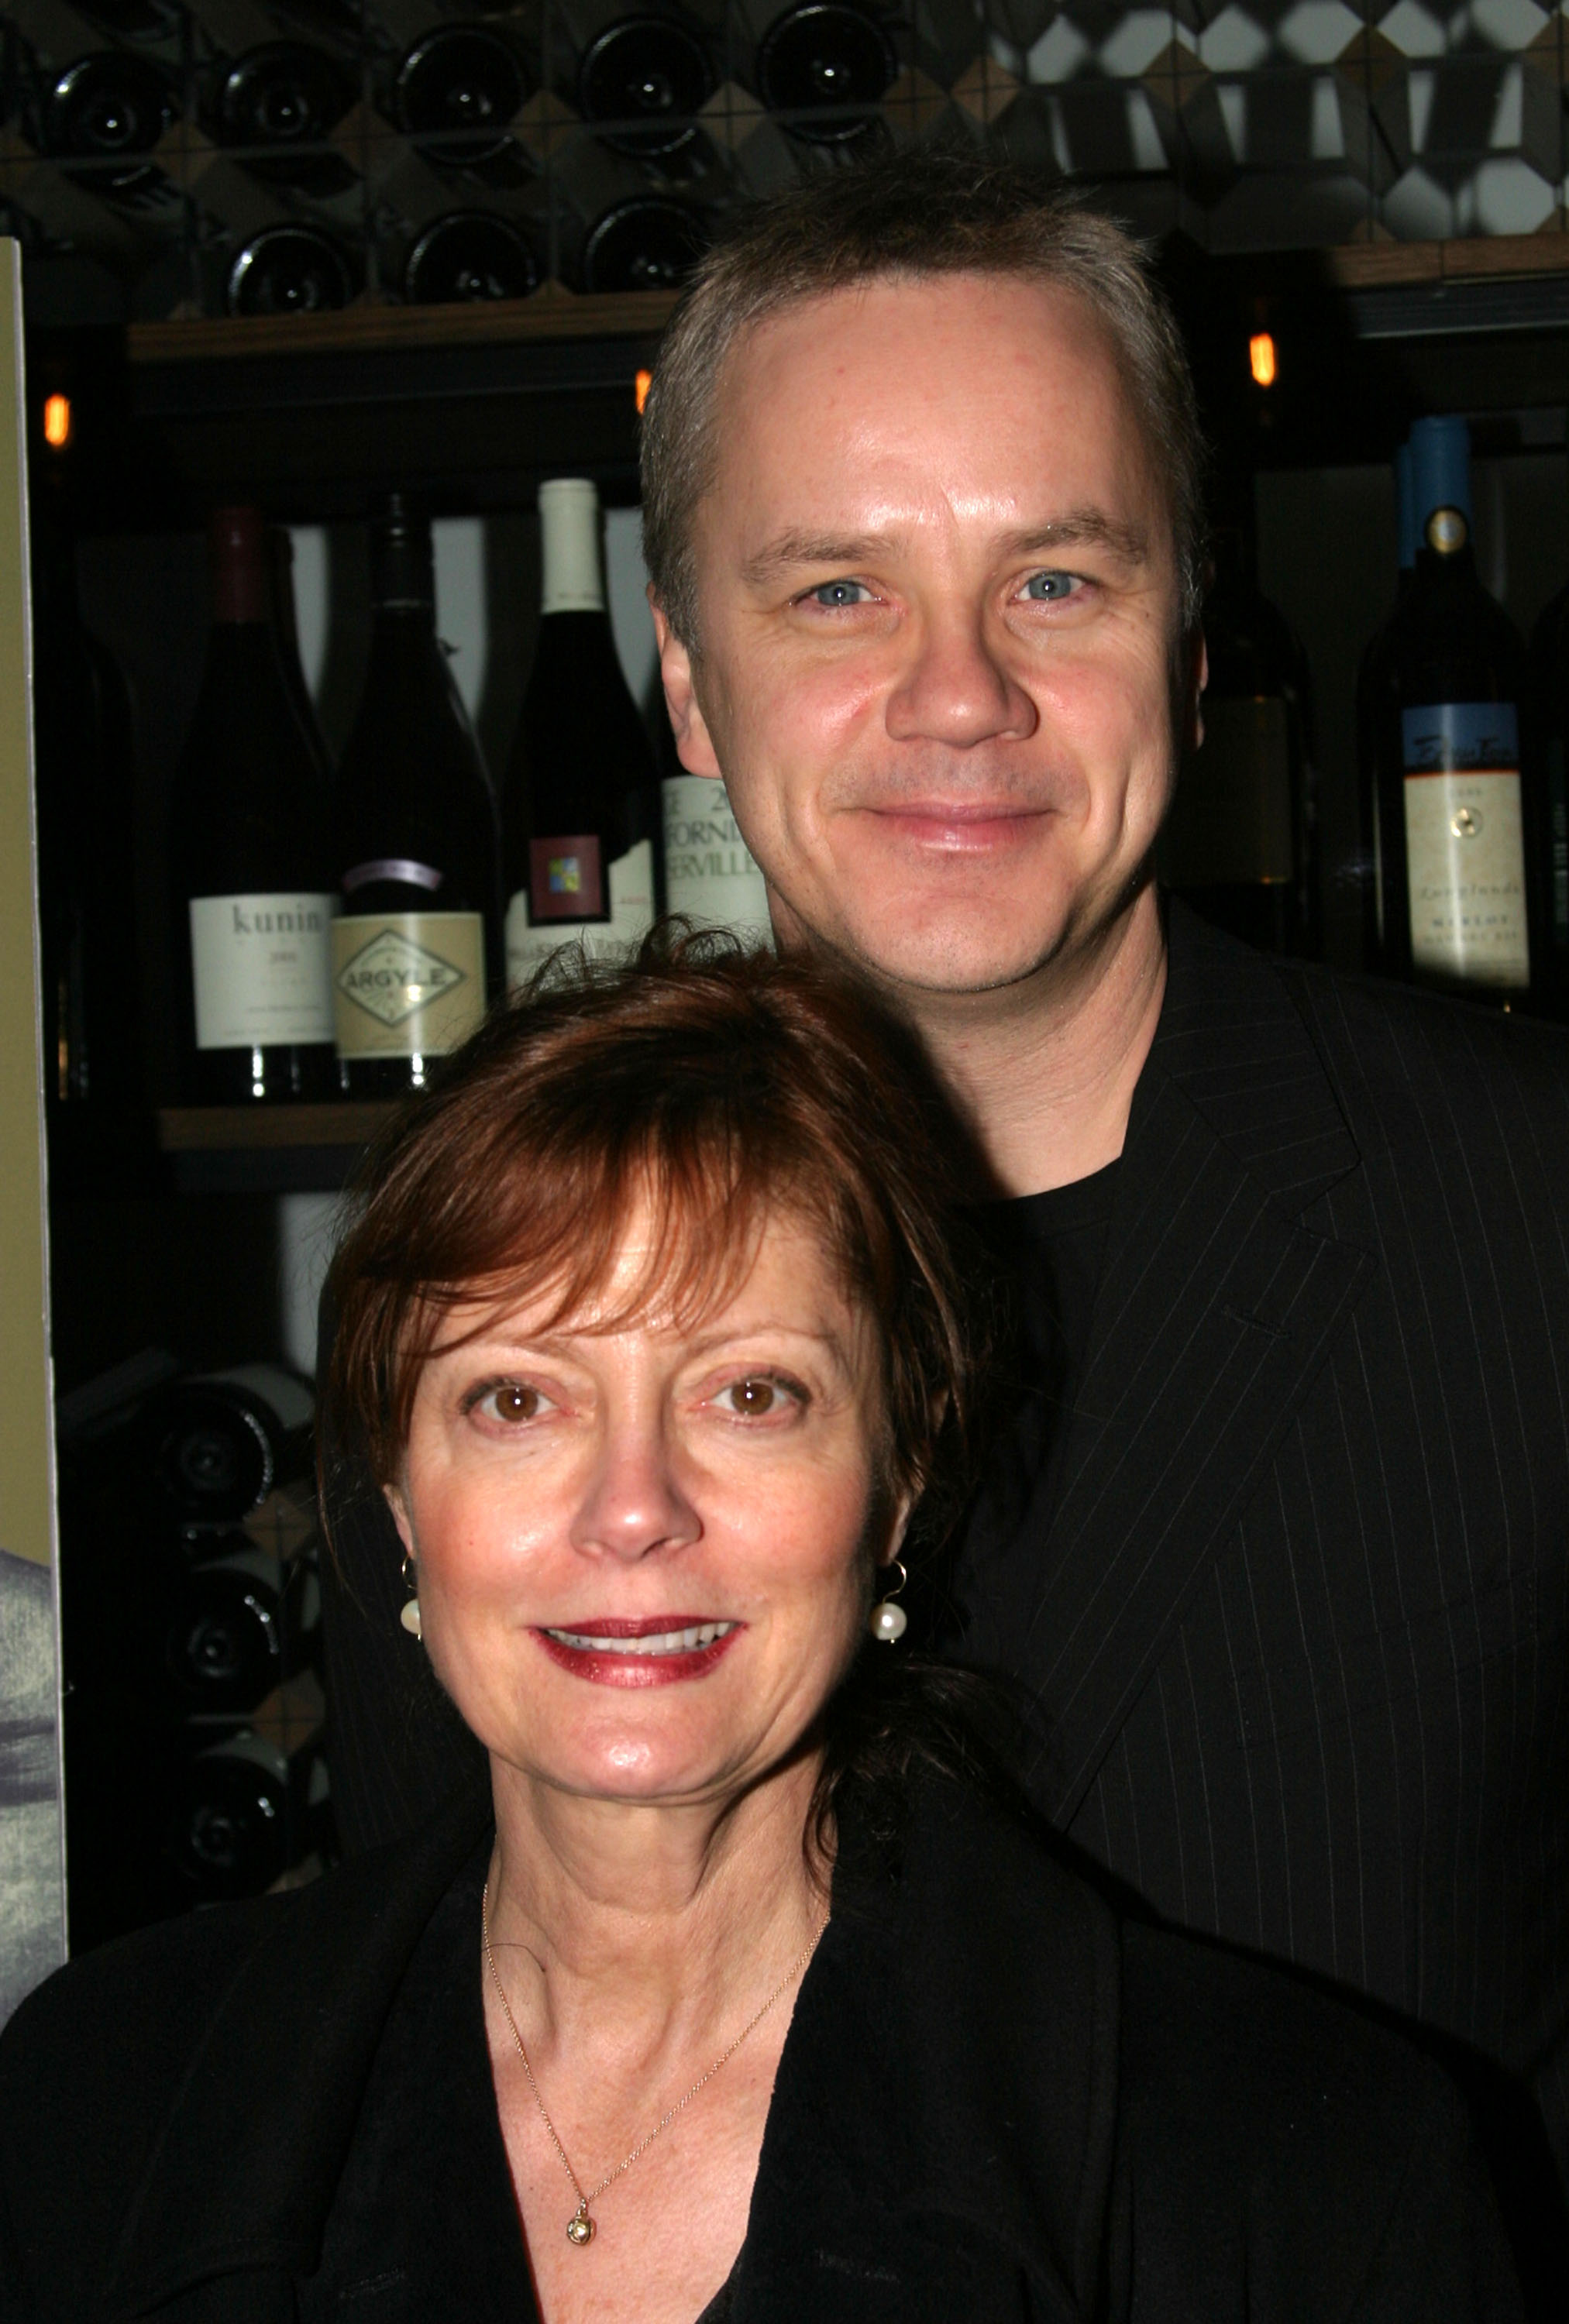 Susan Sarandon and Tim Robbins at the Opening Night Party for "Embedded" on March 14, 2004, in New York City. | Source: Getty Images